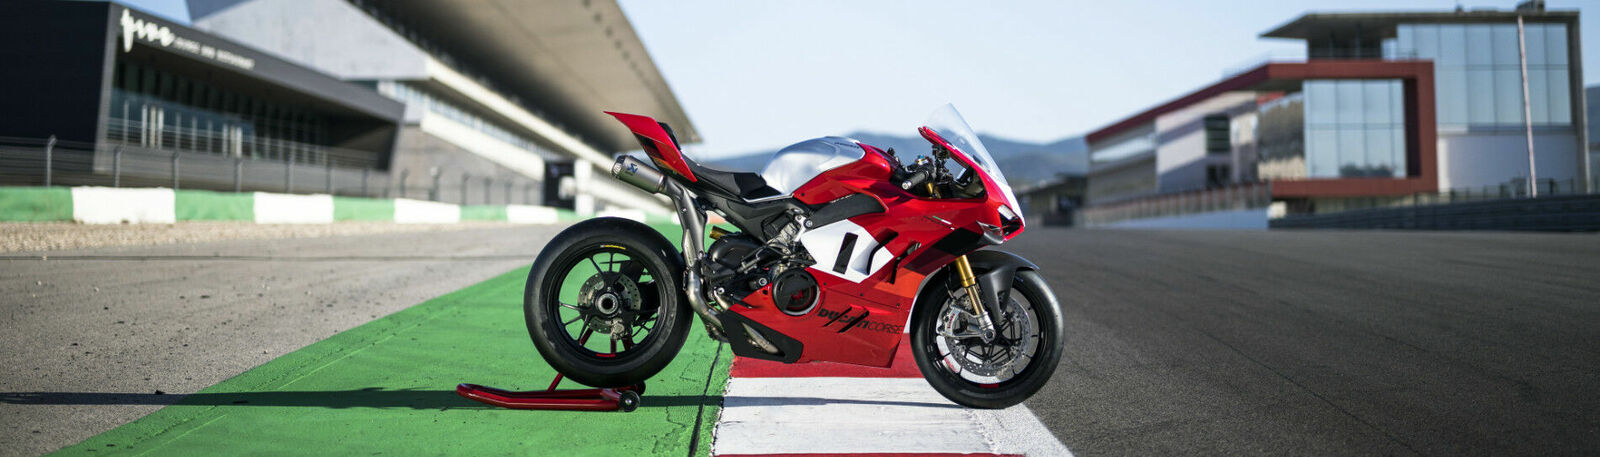 red Ducati standing at the edge of a racecourse